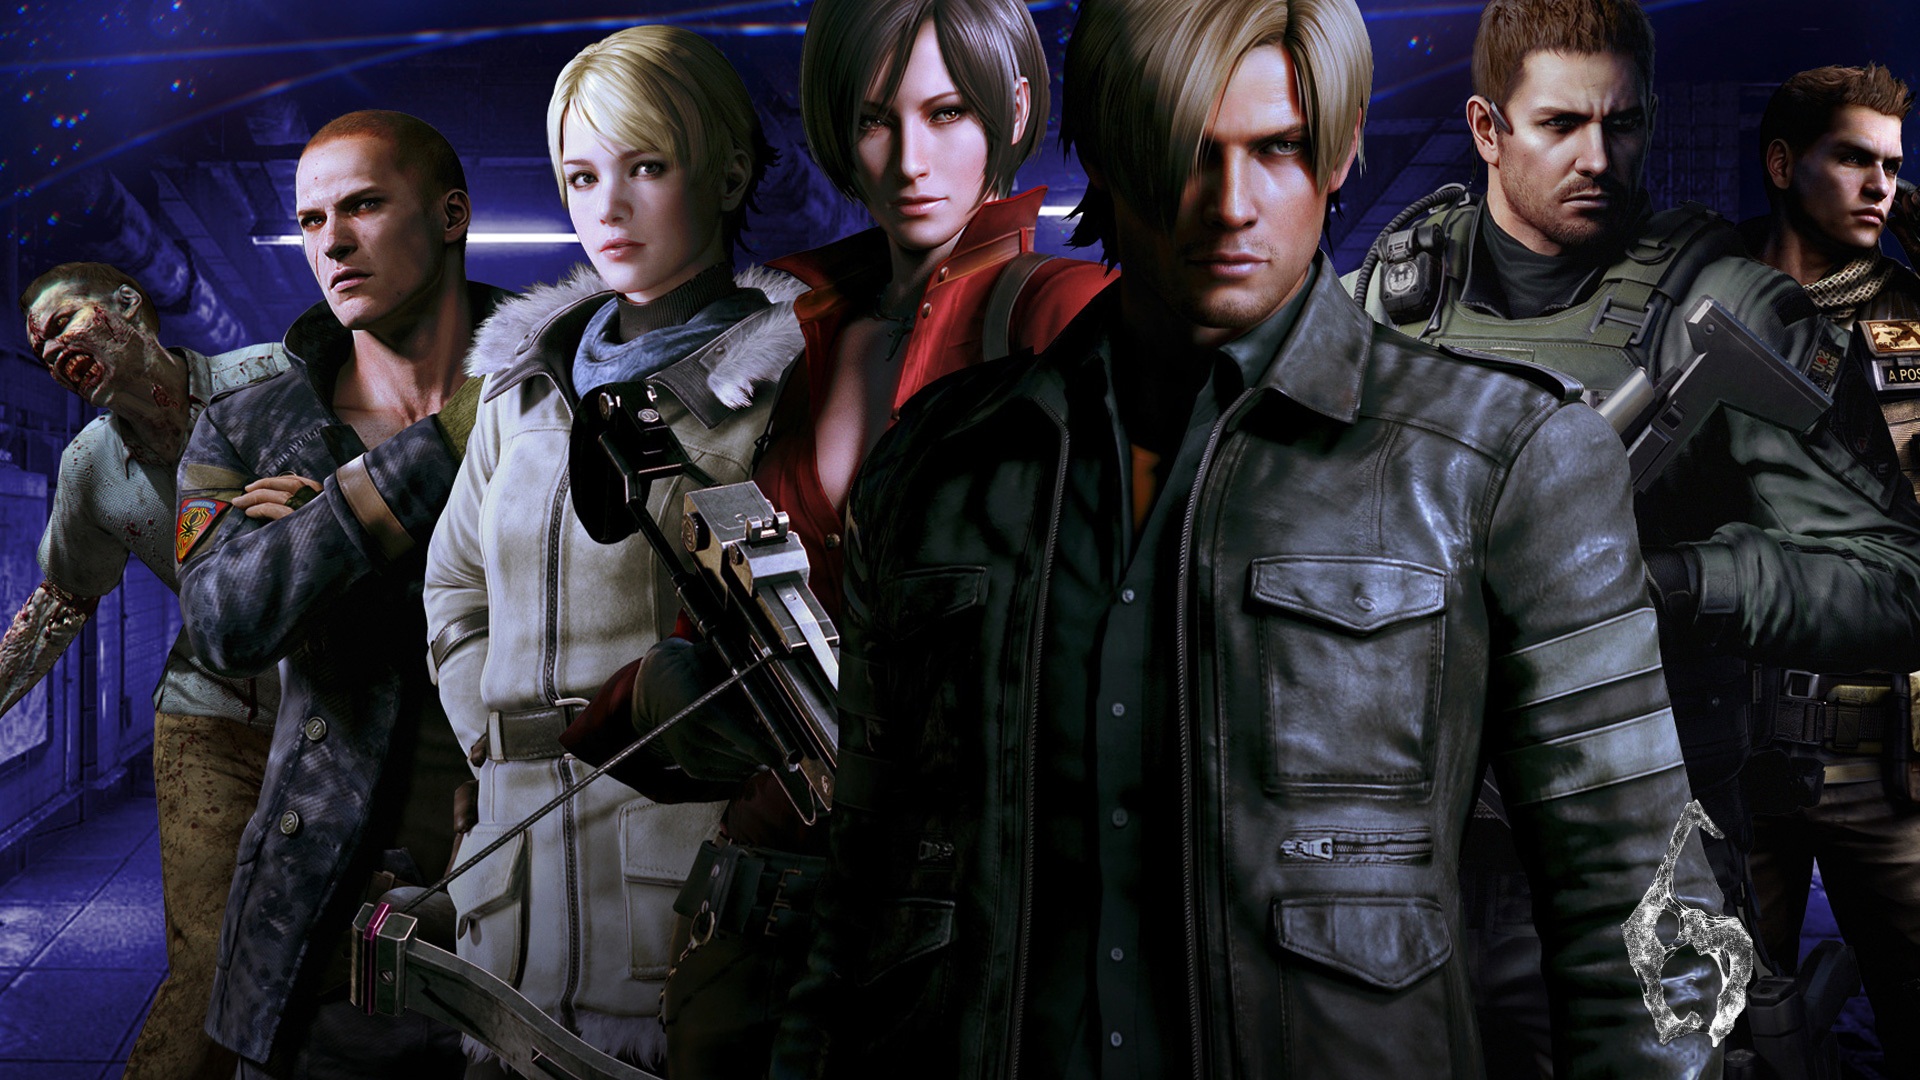 Resident Evil 6 HD game wallpapers #10 - 1920x1080